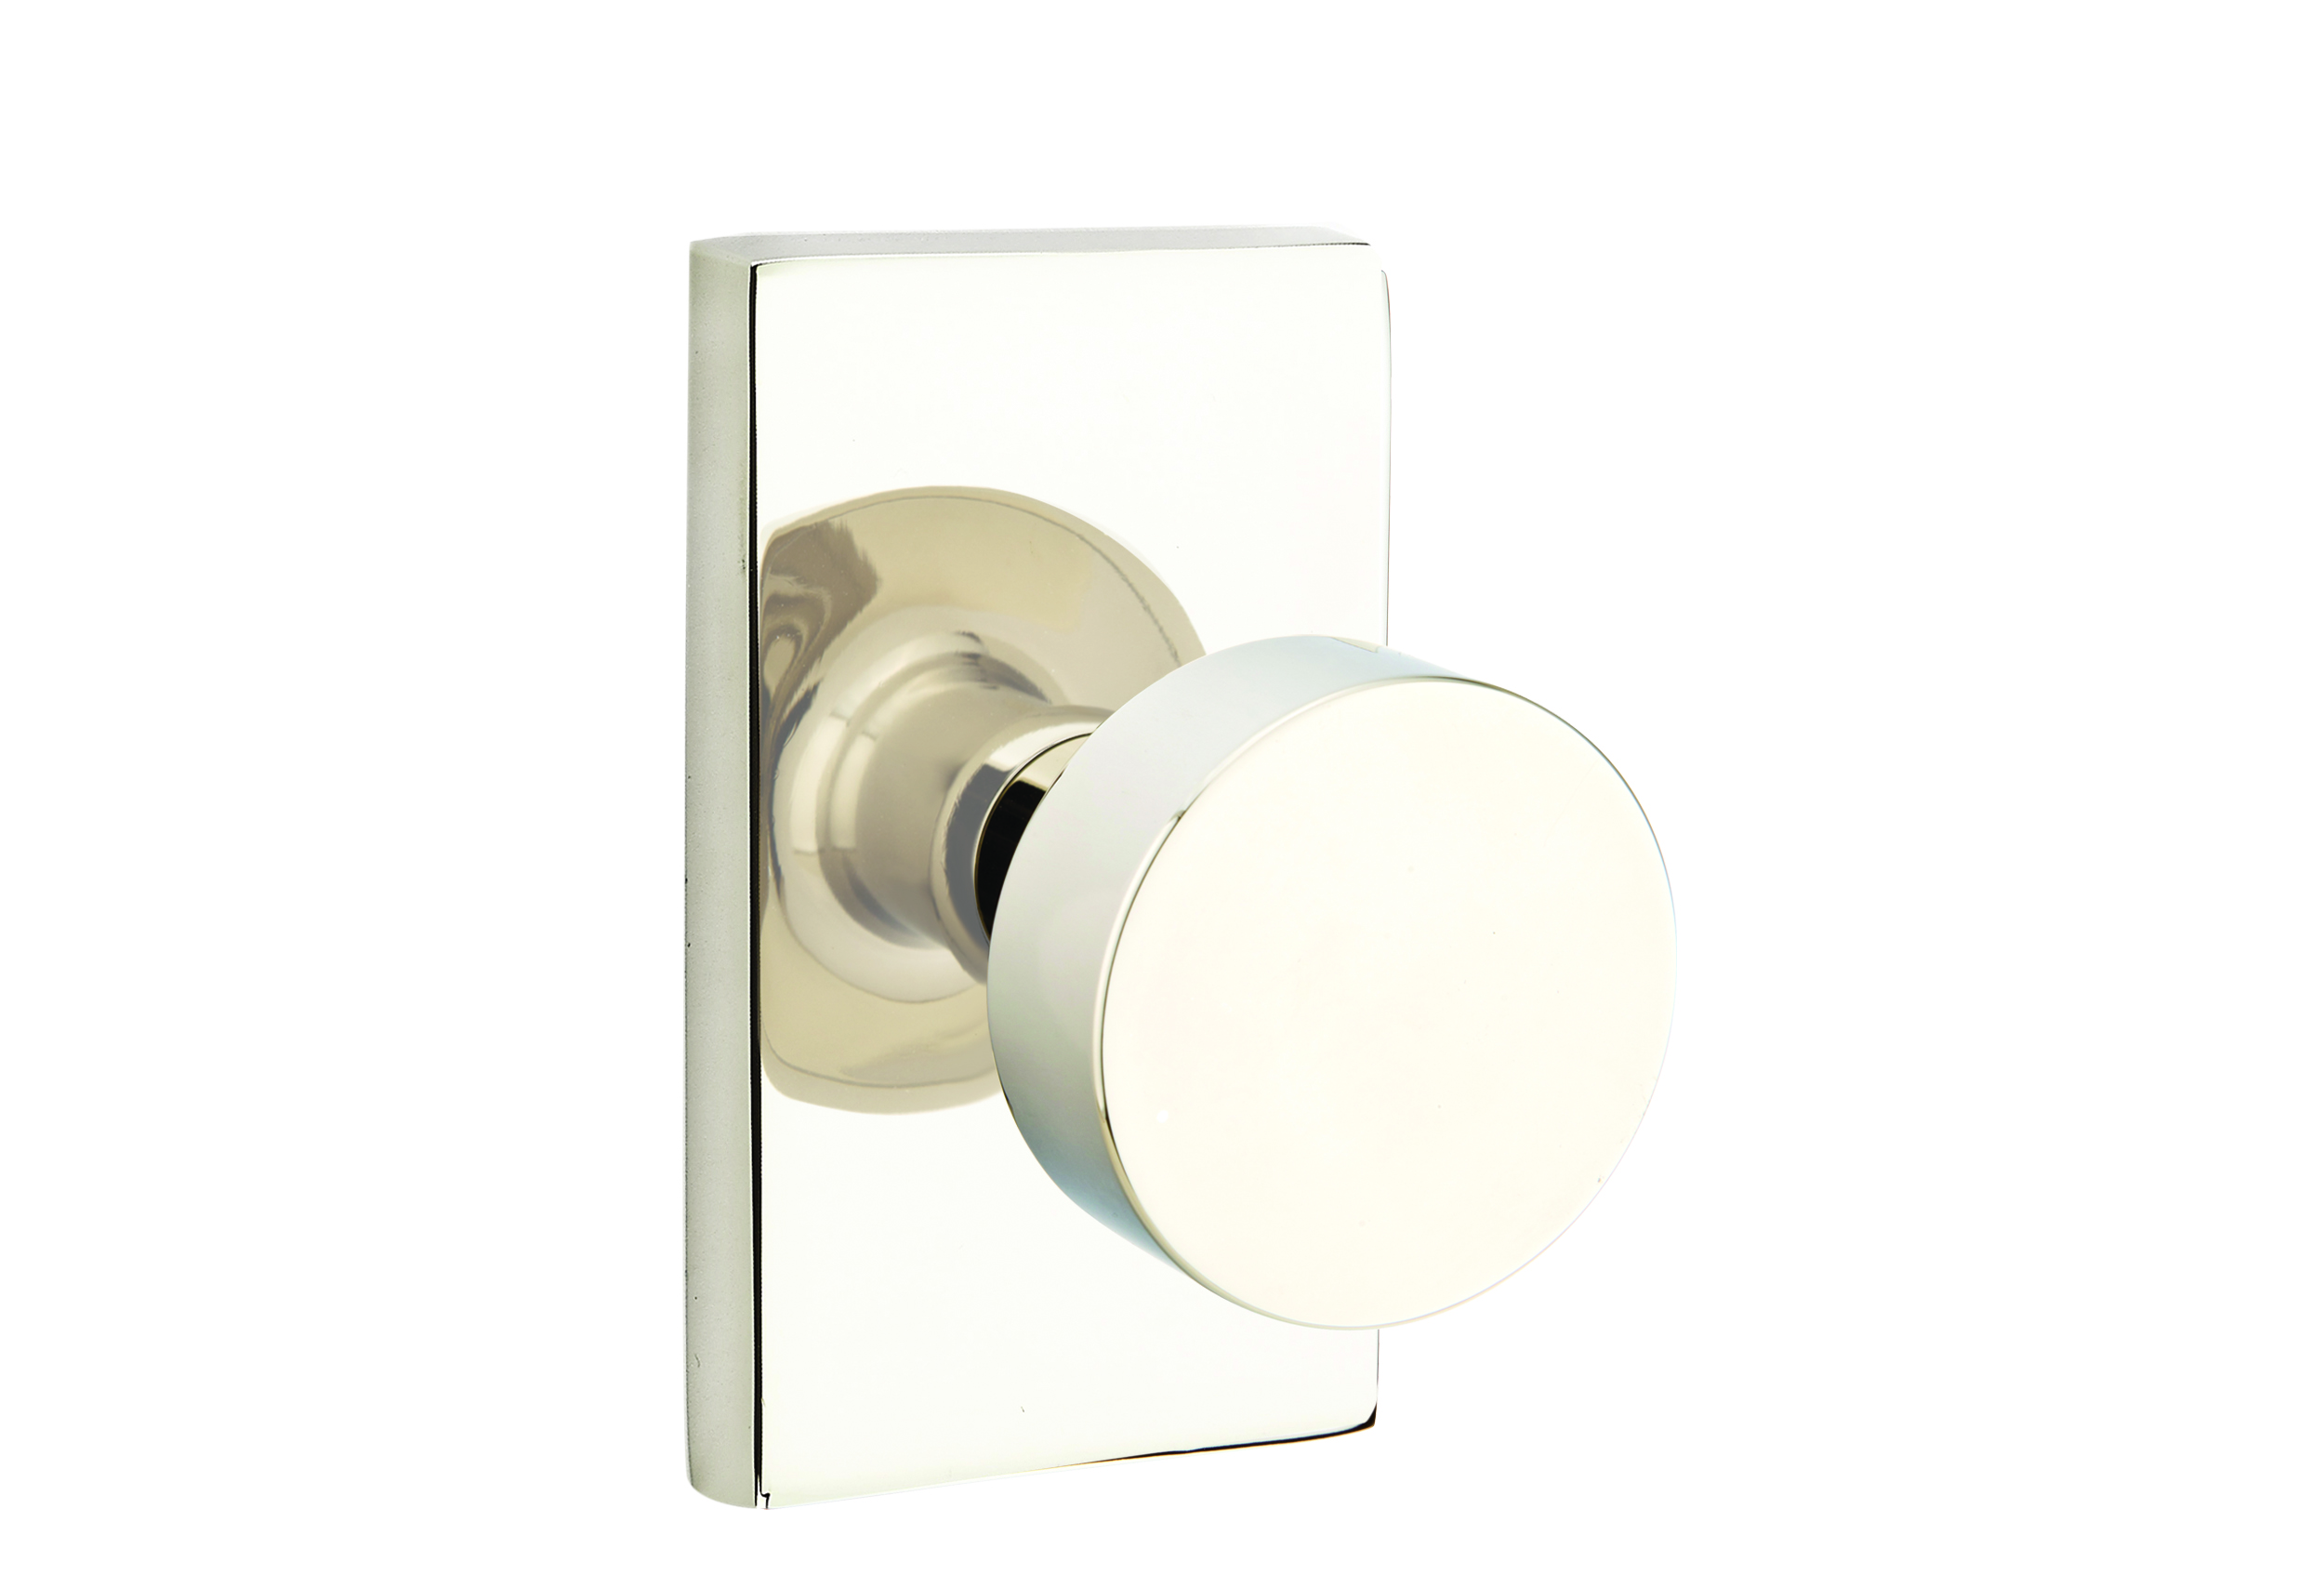 EMTEK Square Rosette Dummy, Pair with Matching Finish Round Knob - Choice  of 7 Finishes - 5050ROUUS4 - Satin Brass (US4), Door Knobs -  Canada